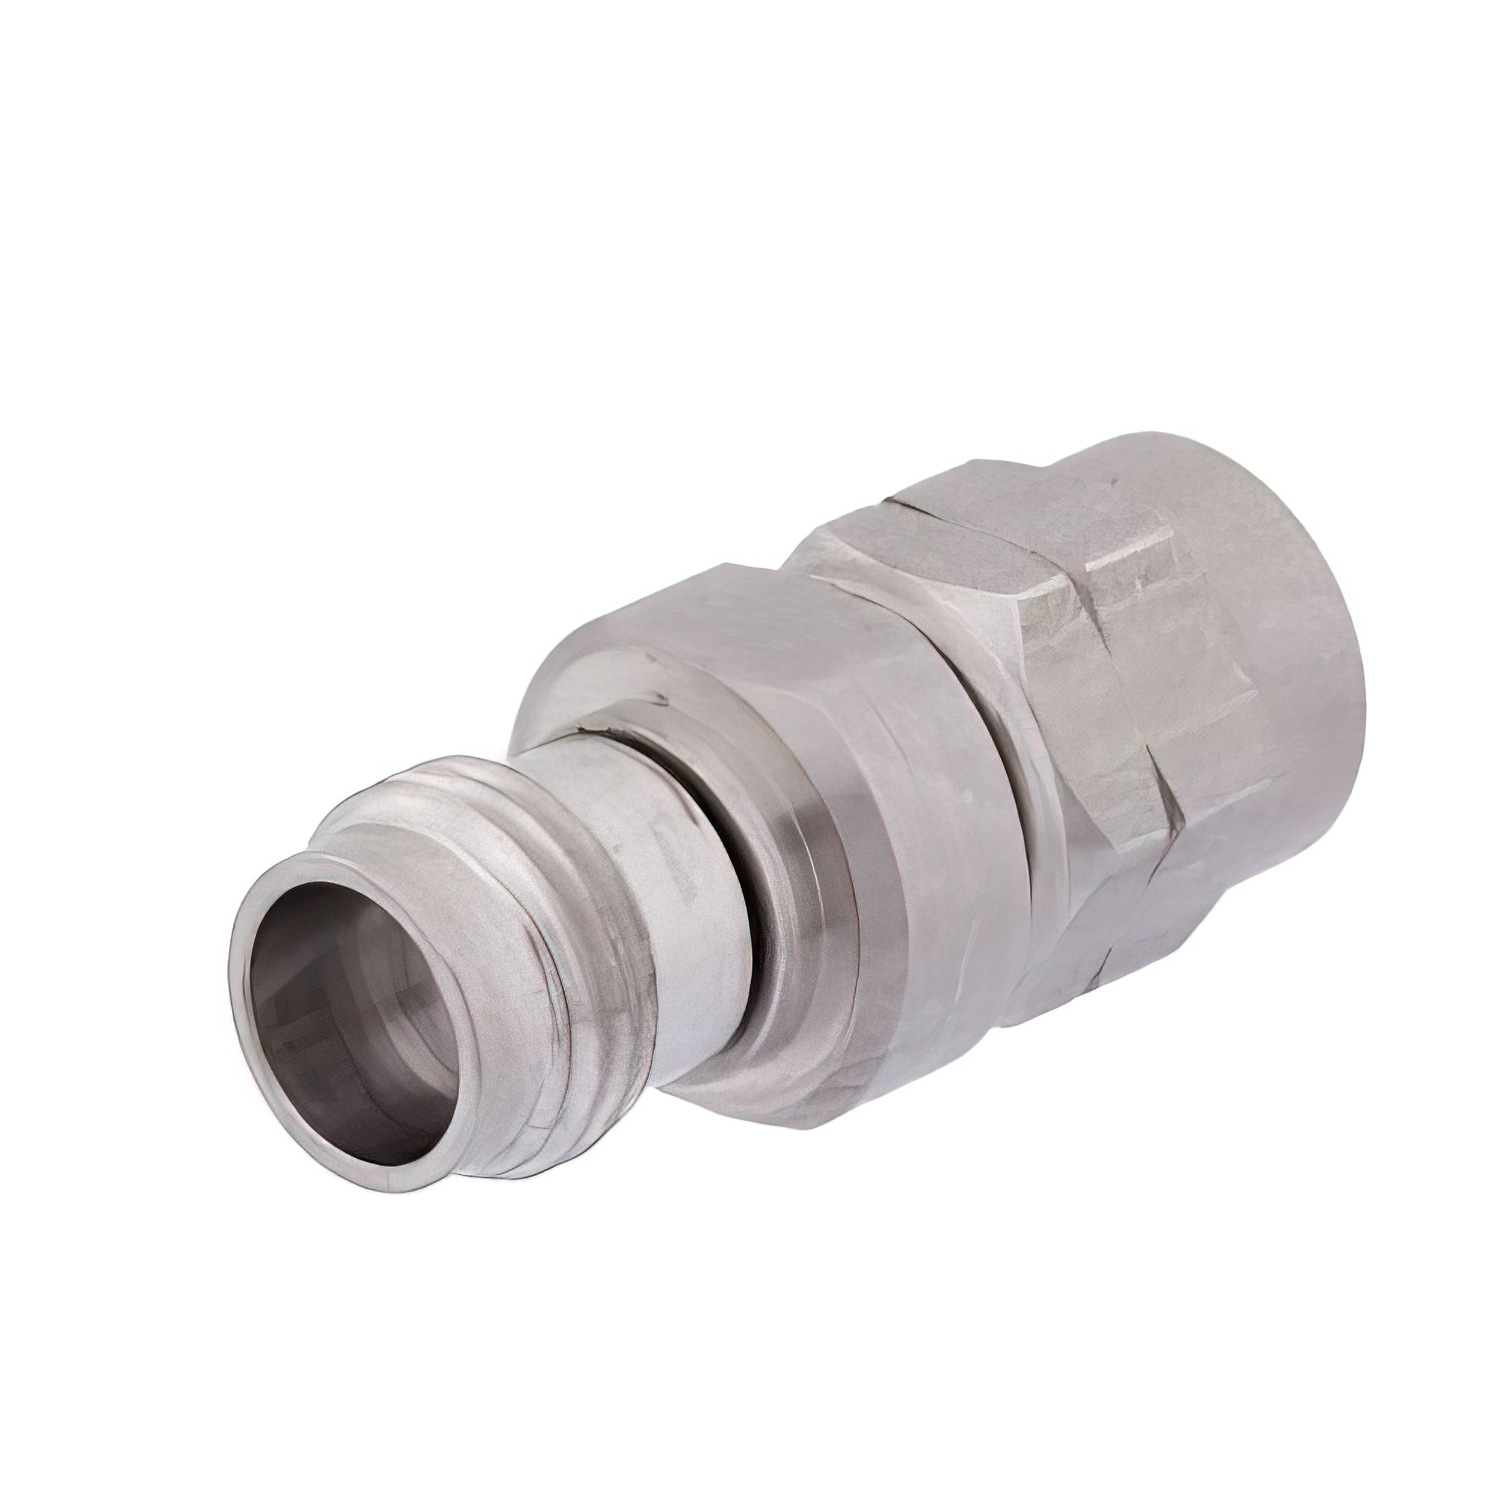 2.4mm male to 2.4mm female adapter1